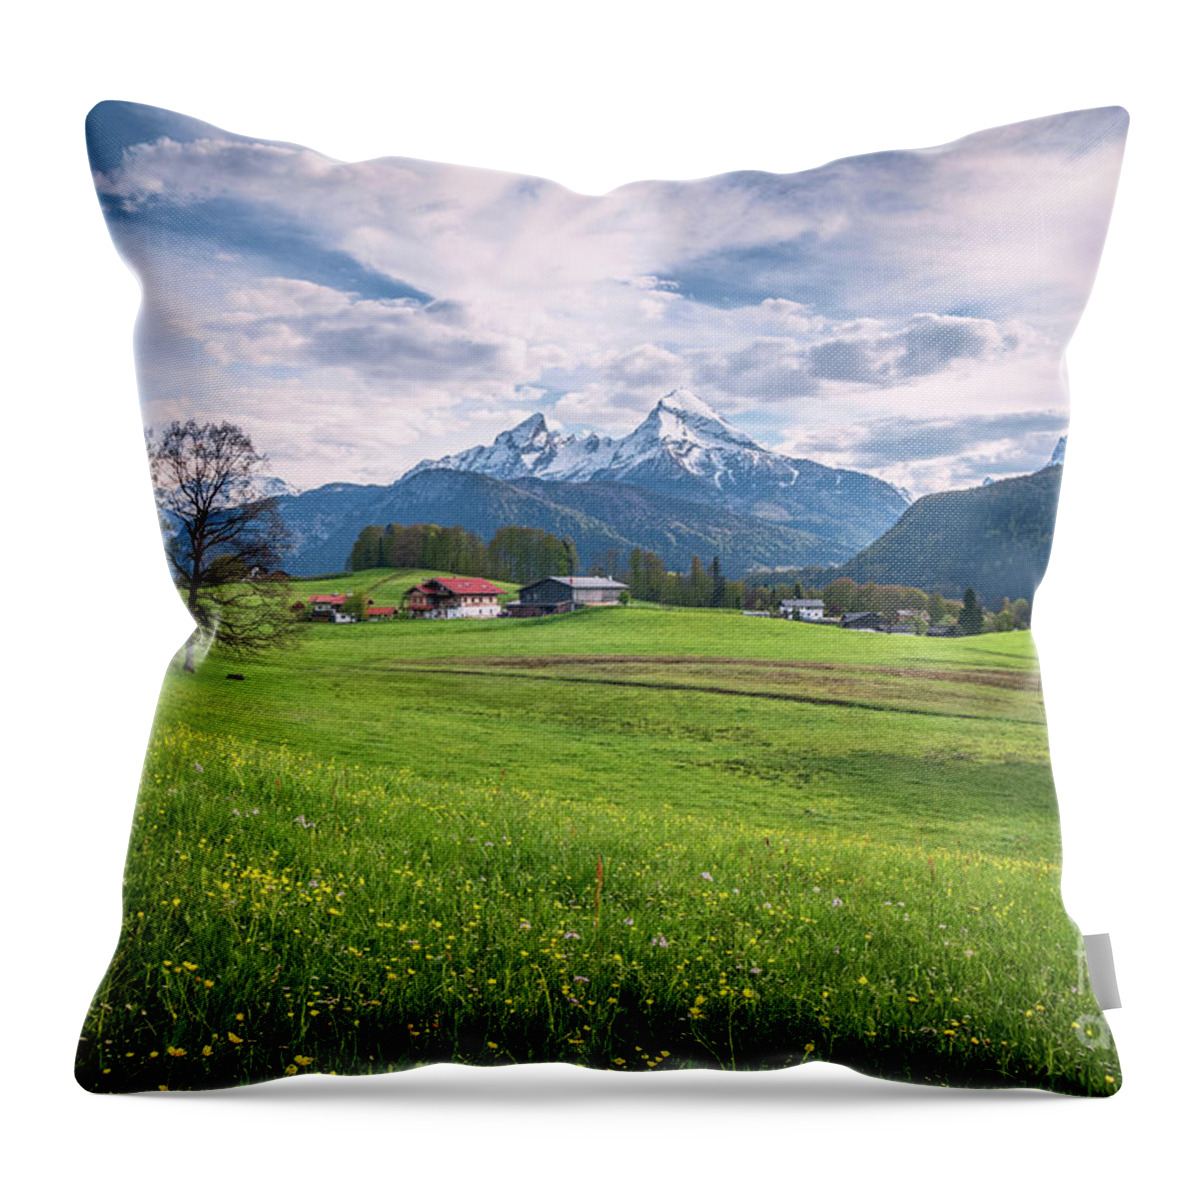 Alpen Throw Pillow featuring the photograph Mountain Pastures by JR Photography